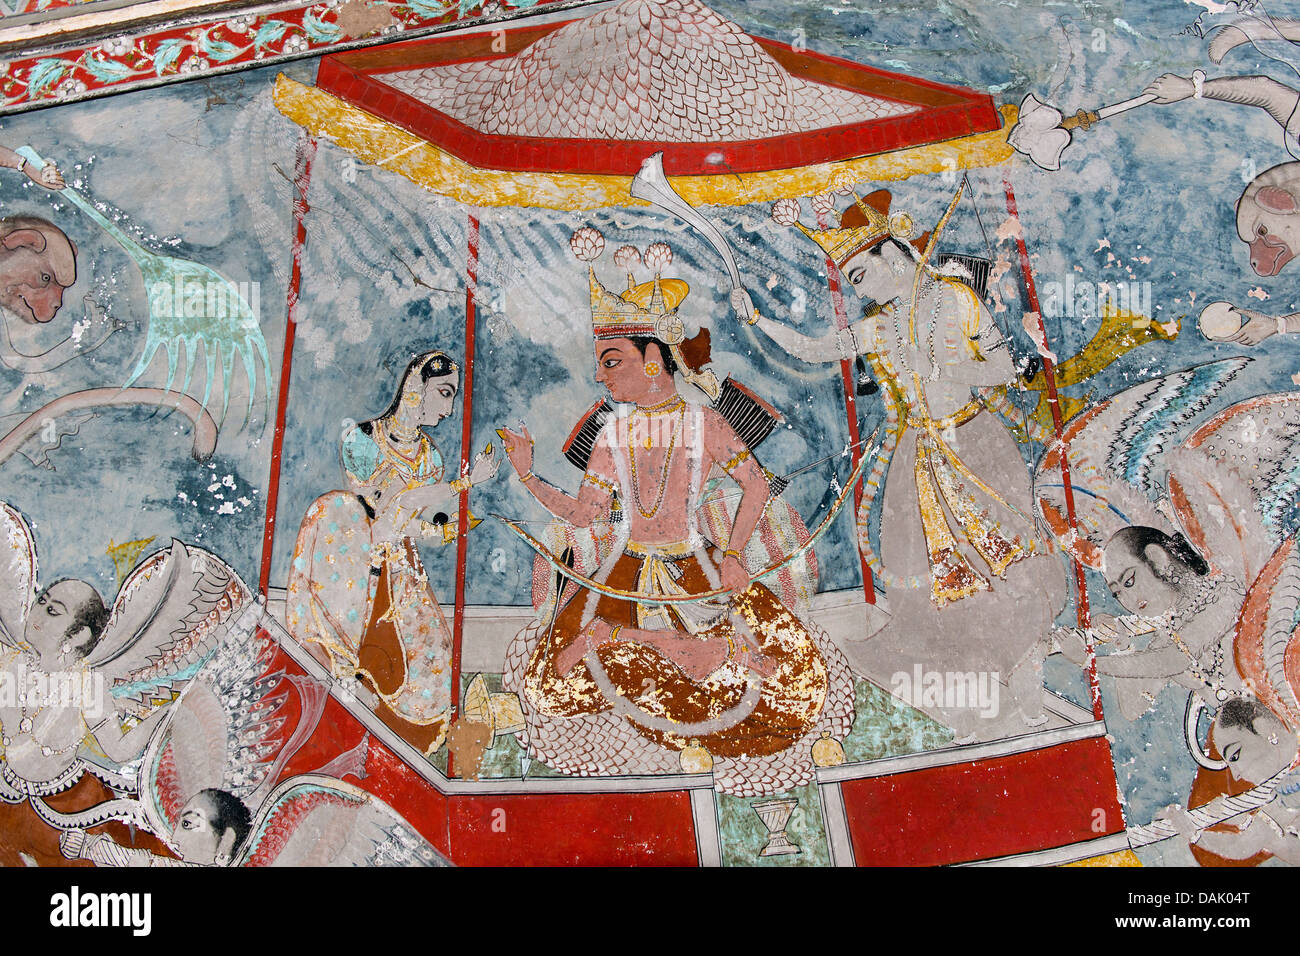 Man under a baldachin, mural or fresco painted with natural colours, Badal Mahal or Cloud Palace, Bundikalam school of painting Stock Photo